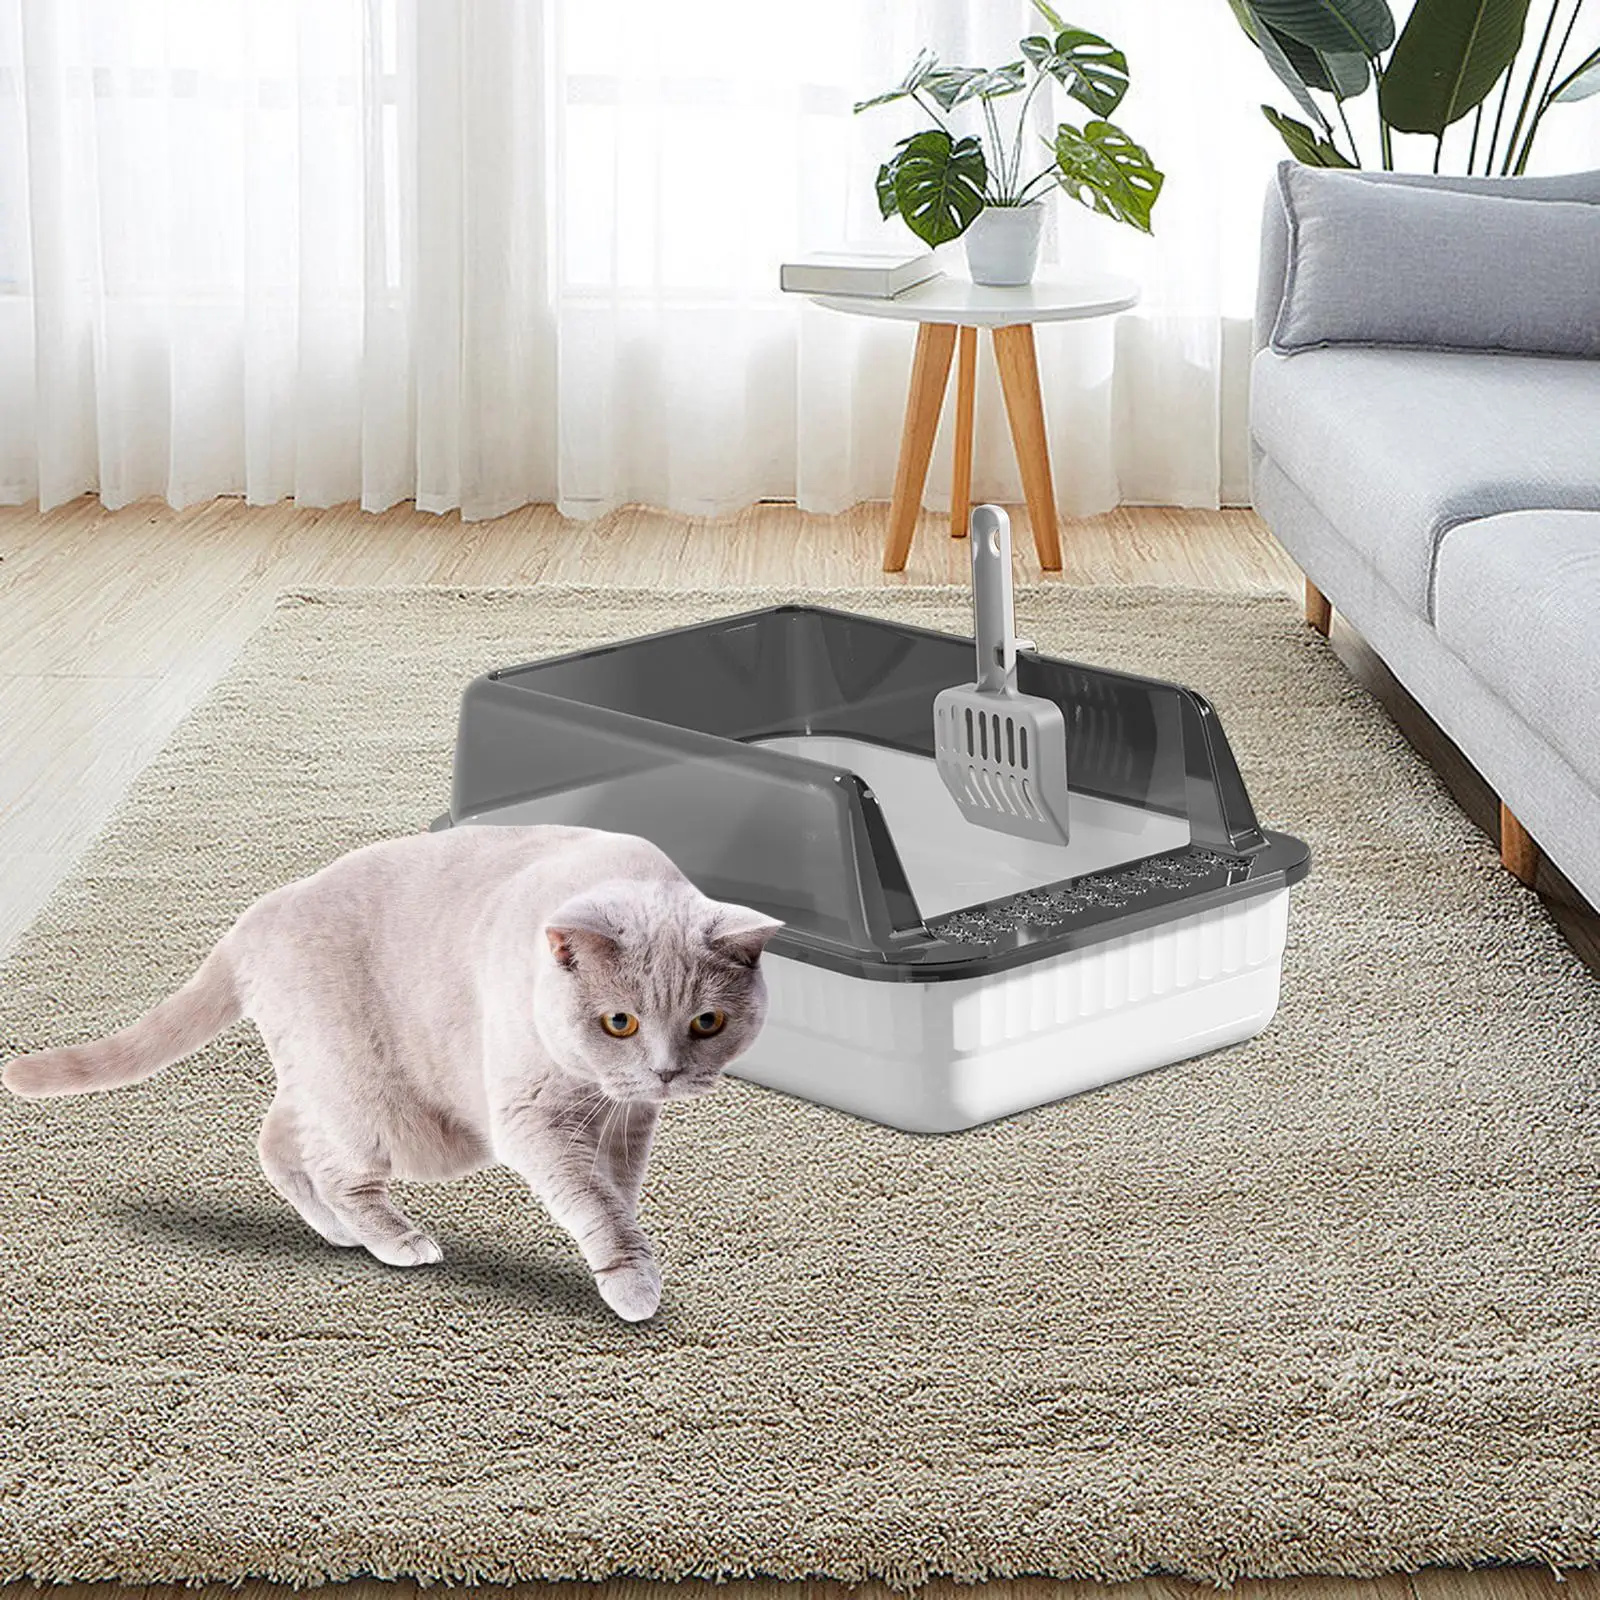 Cat Tray Toilet Set Detachable Semi Enclosed 10cm Tall Raised Fence Pet Cleaning Supplies Leakproof with Scoop for Small Pets